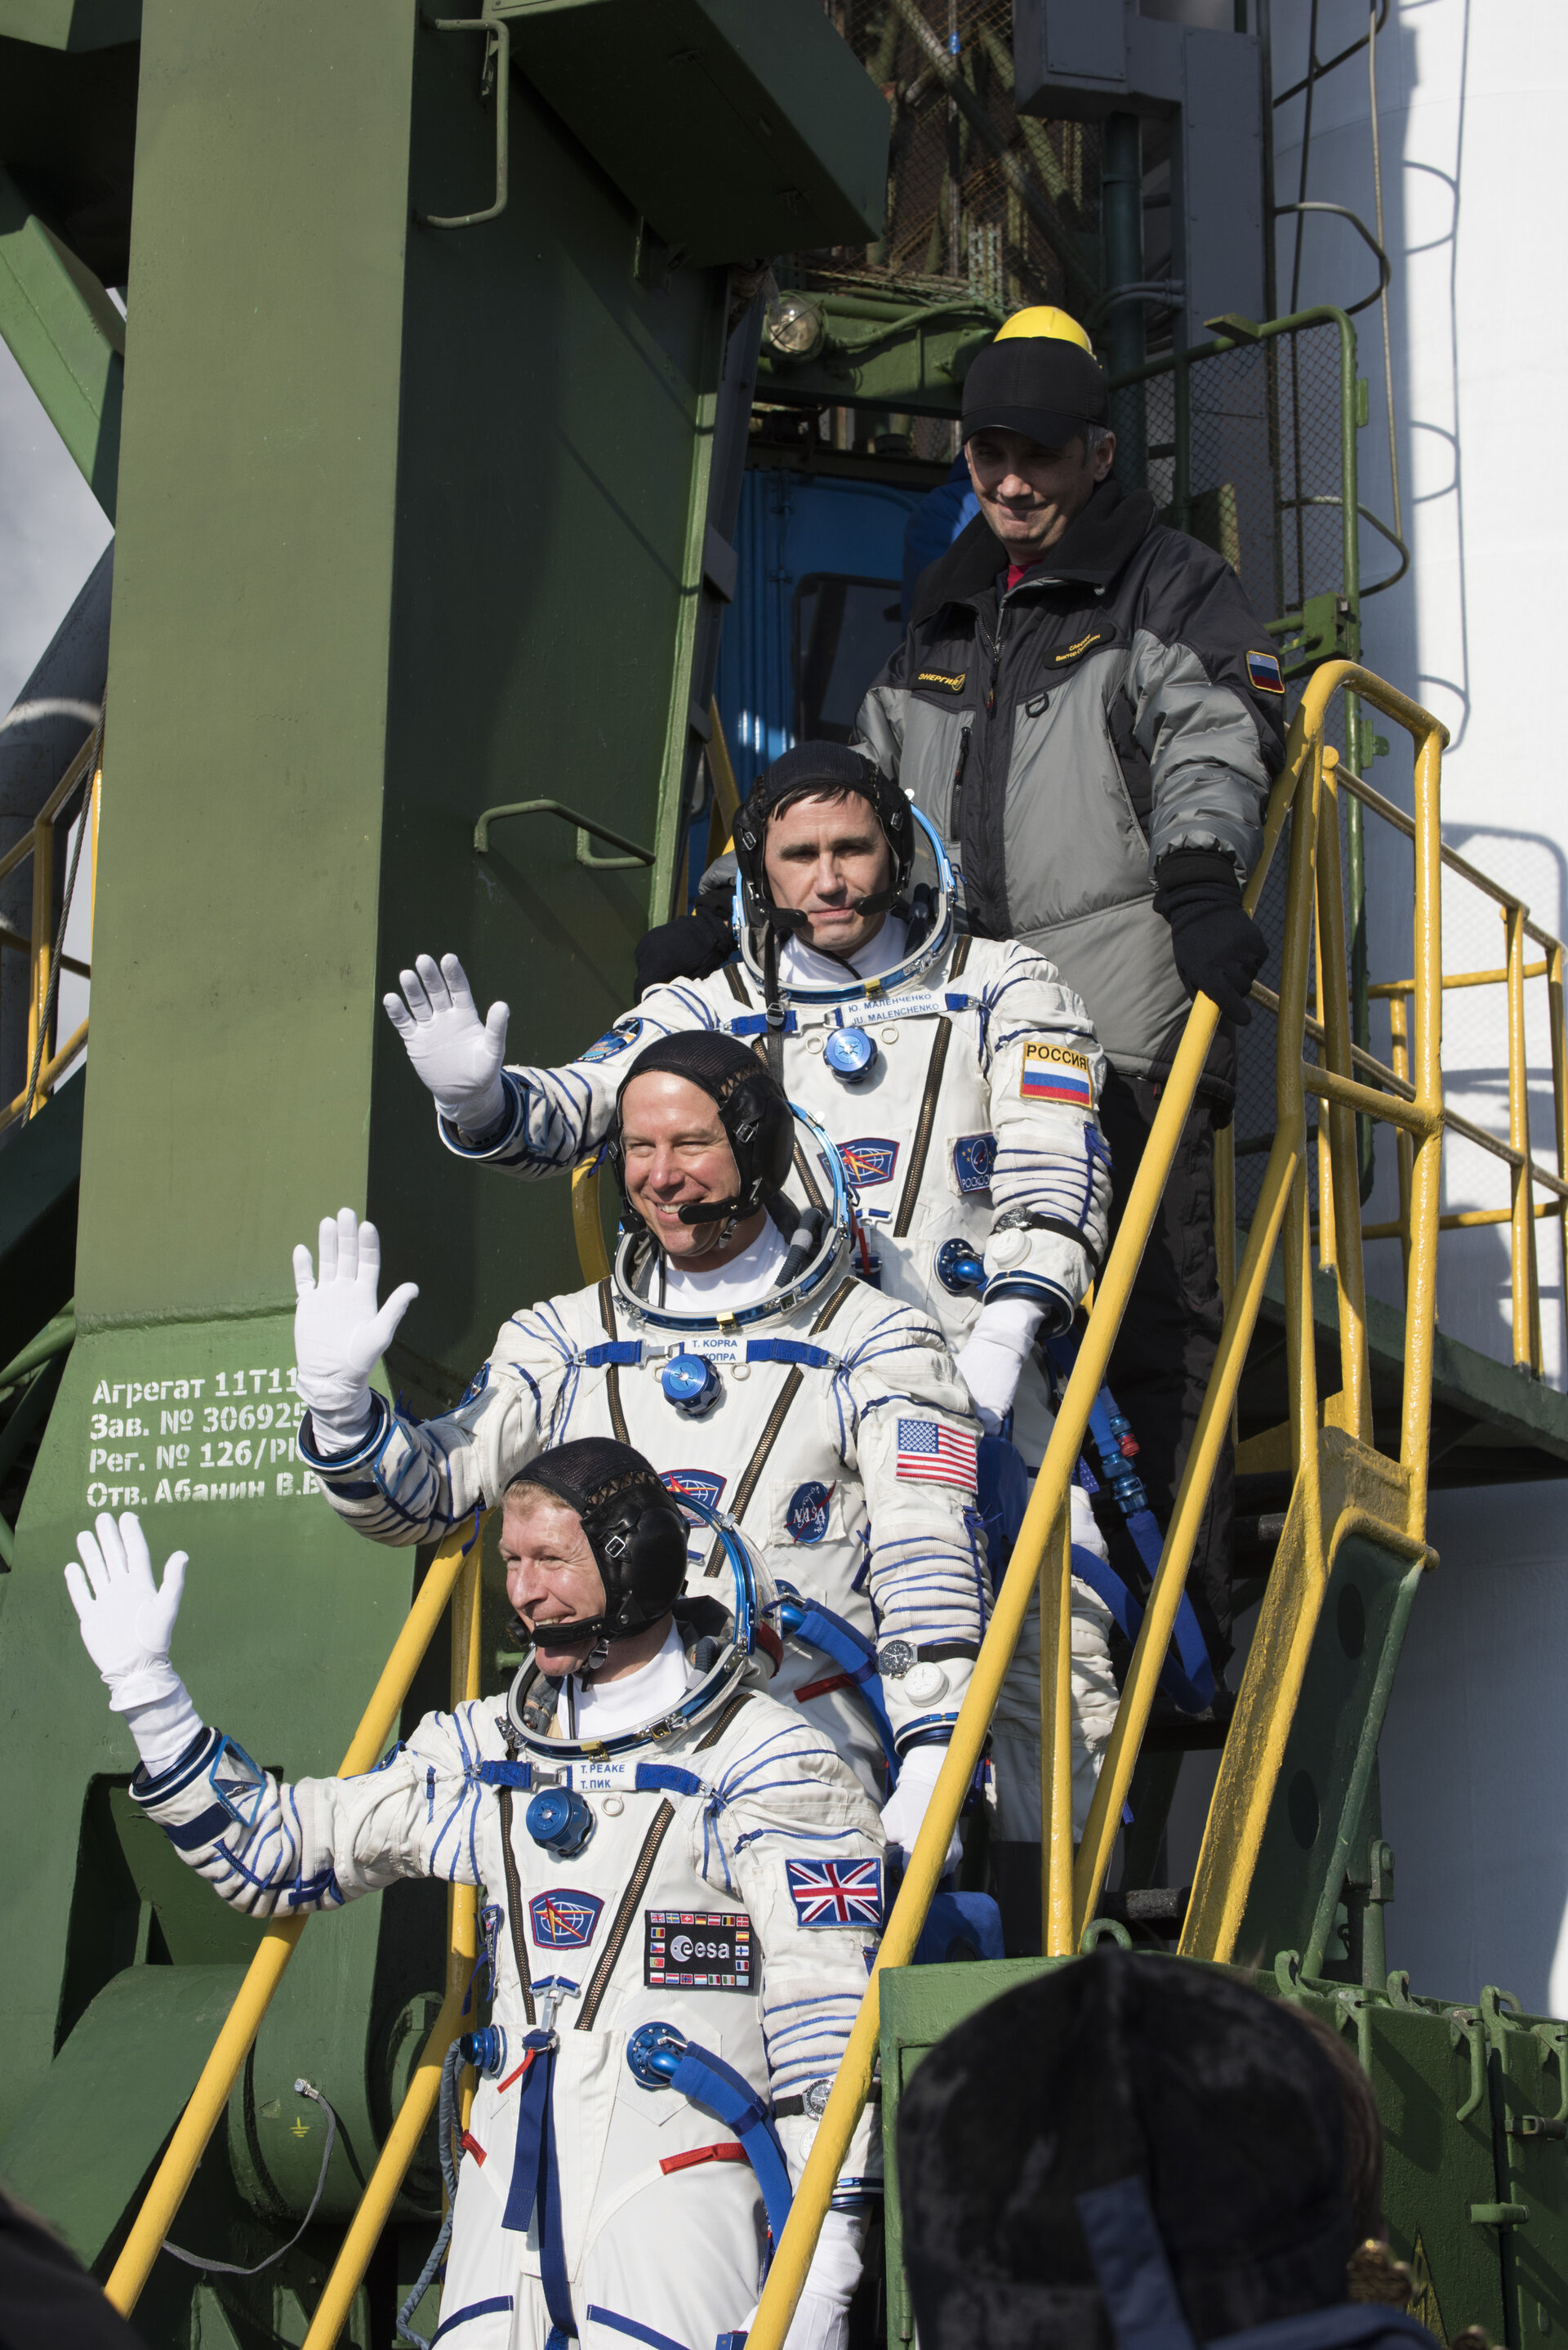 Soyuz TMA-19M crew members greeting audience at the launch pad